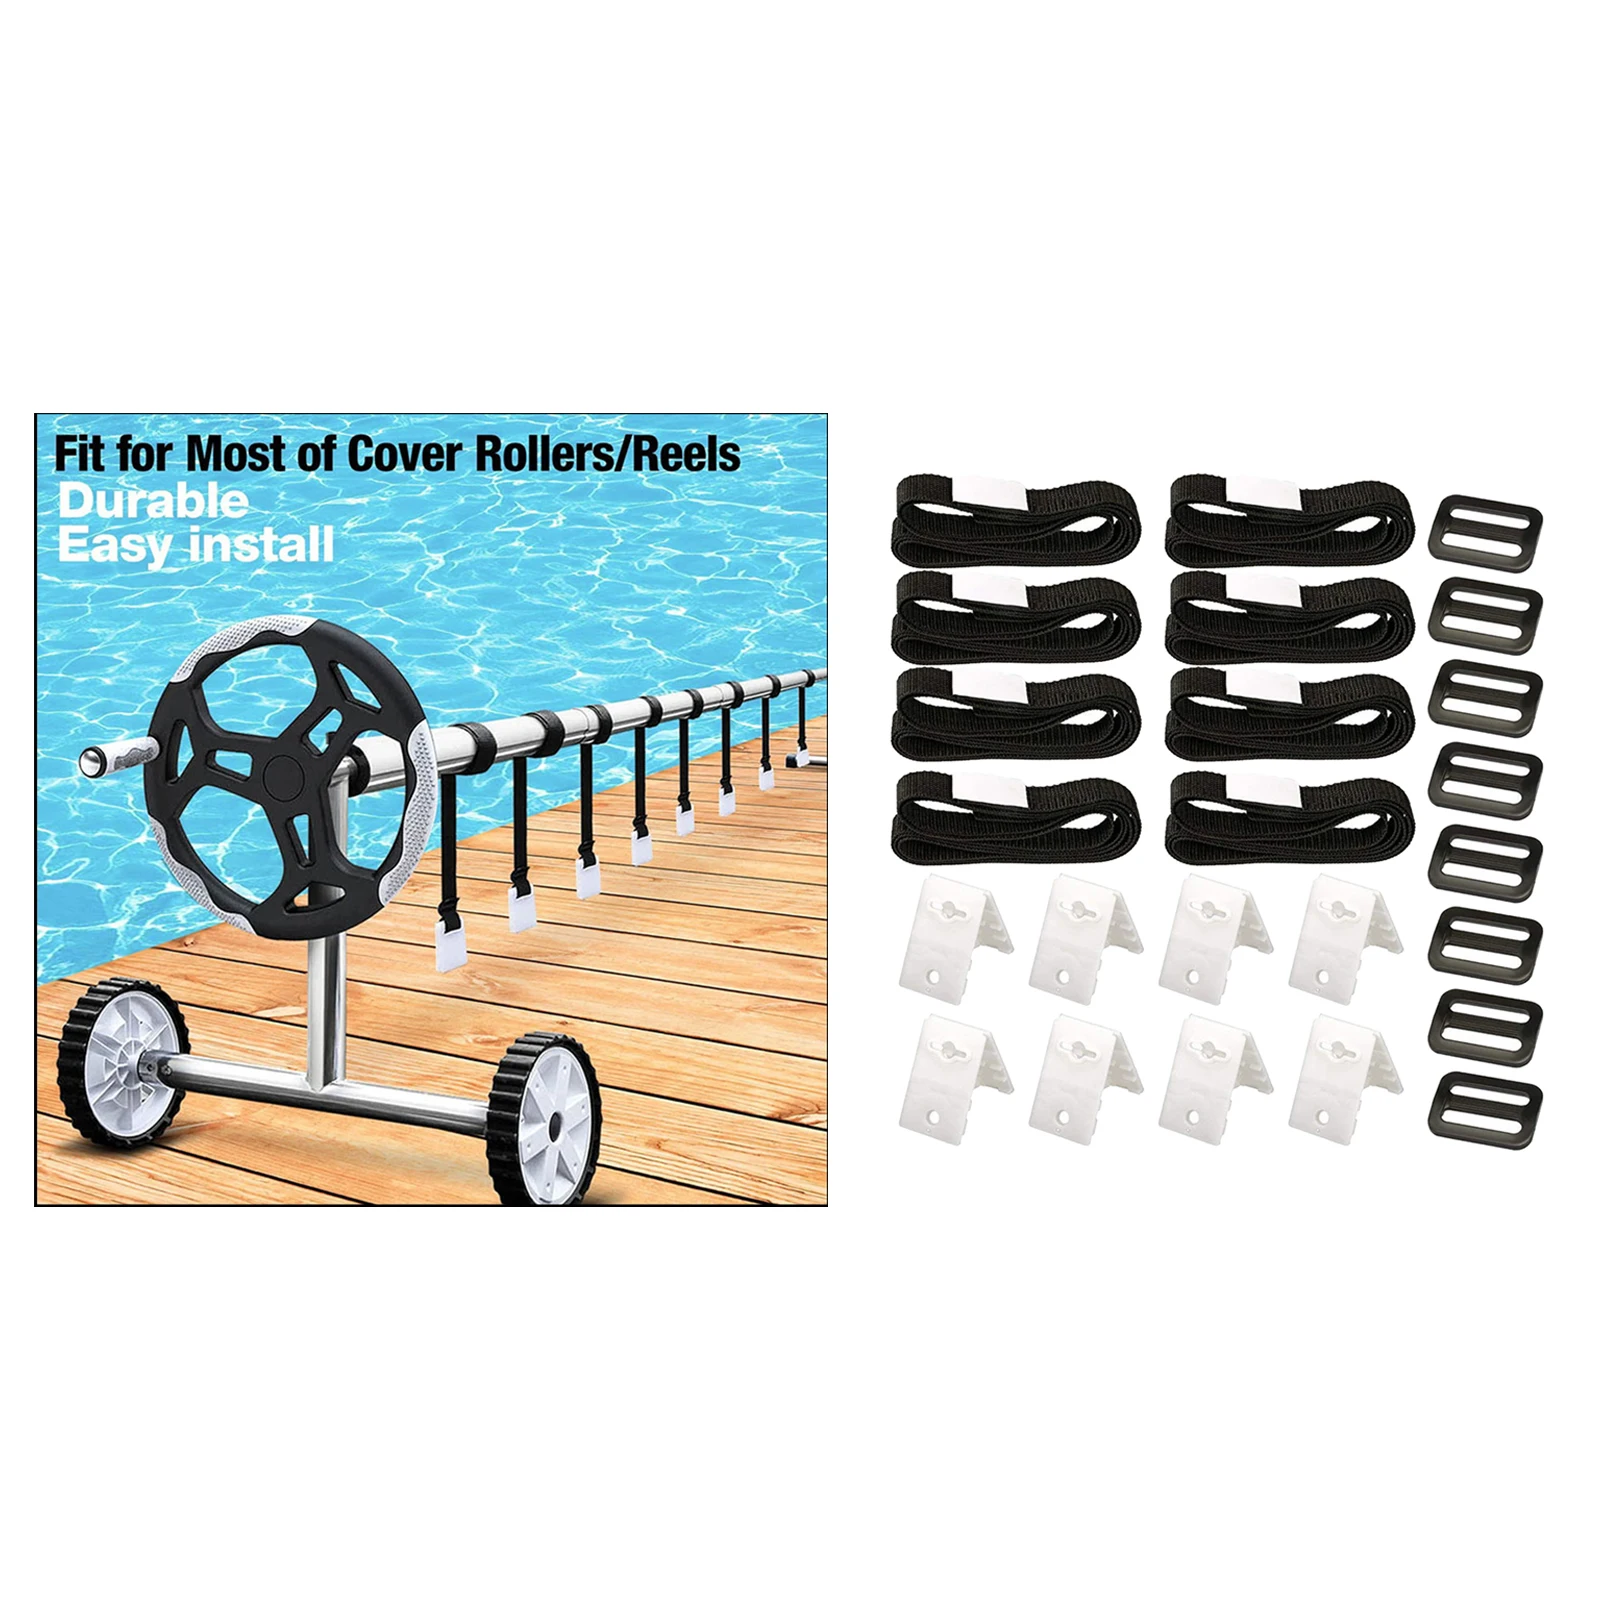 Universal Pool Solar Cover Reel Attachment Straps Kit for Swimming Pool